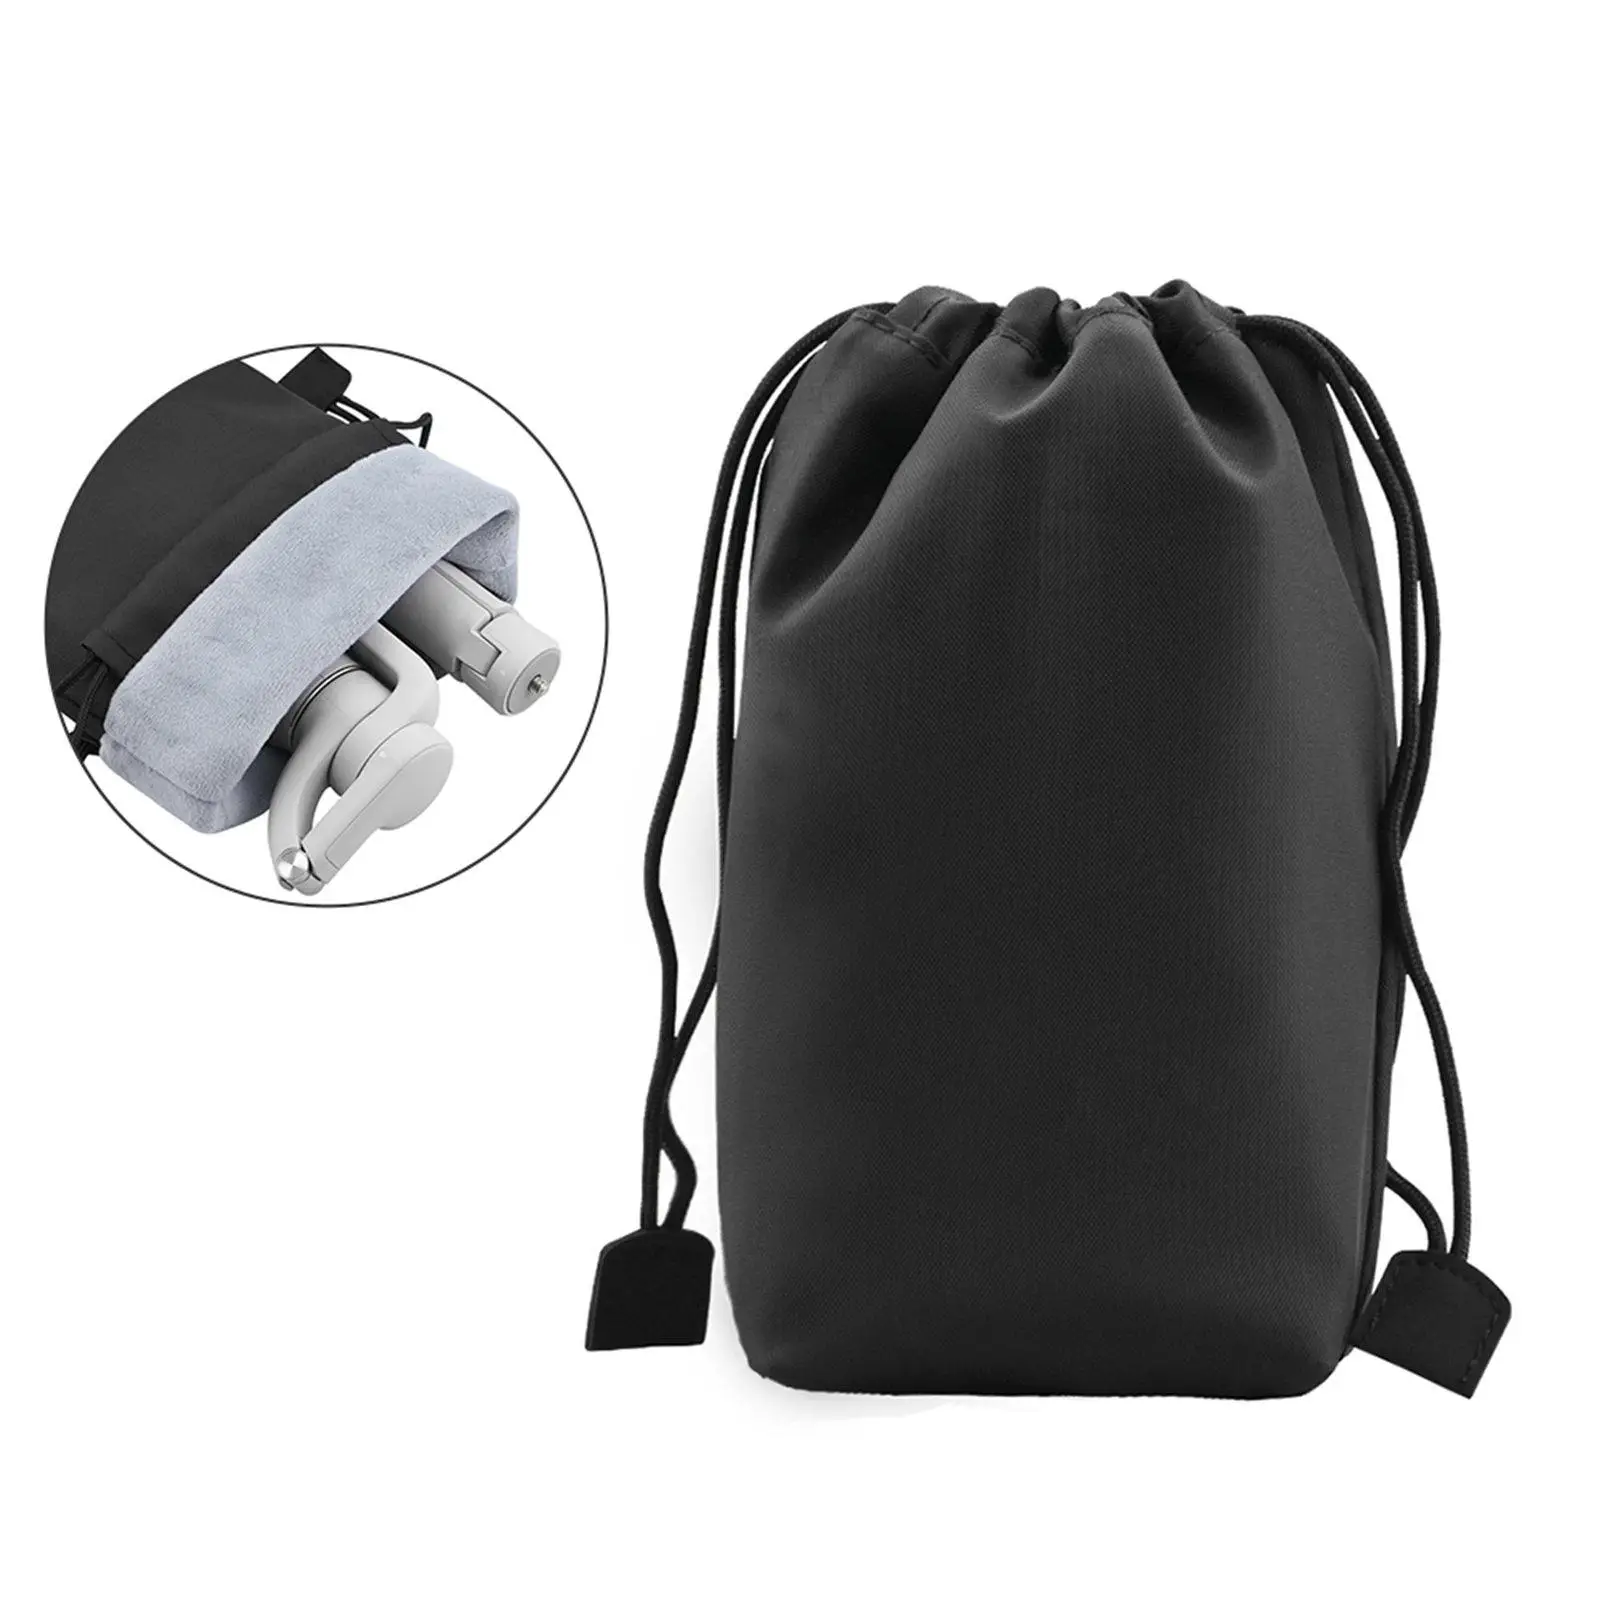 Storage Bag Handbag Carrying Pouch Drawstring for 1 / 2 /  /  / S RC  Parts Travel